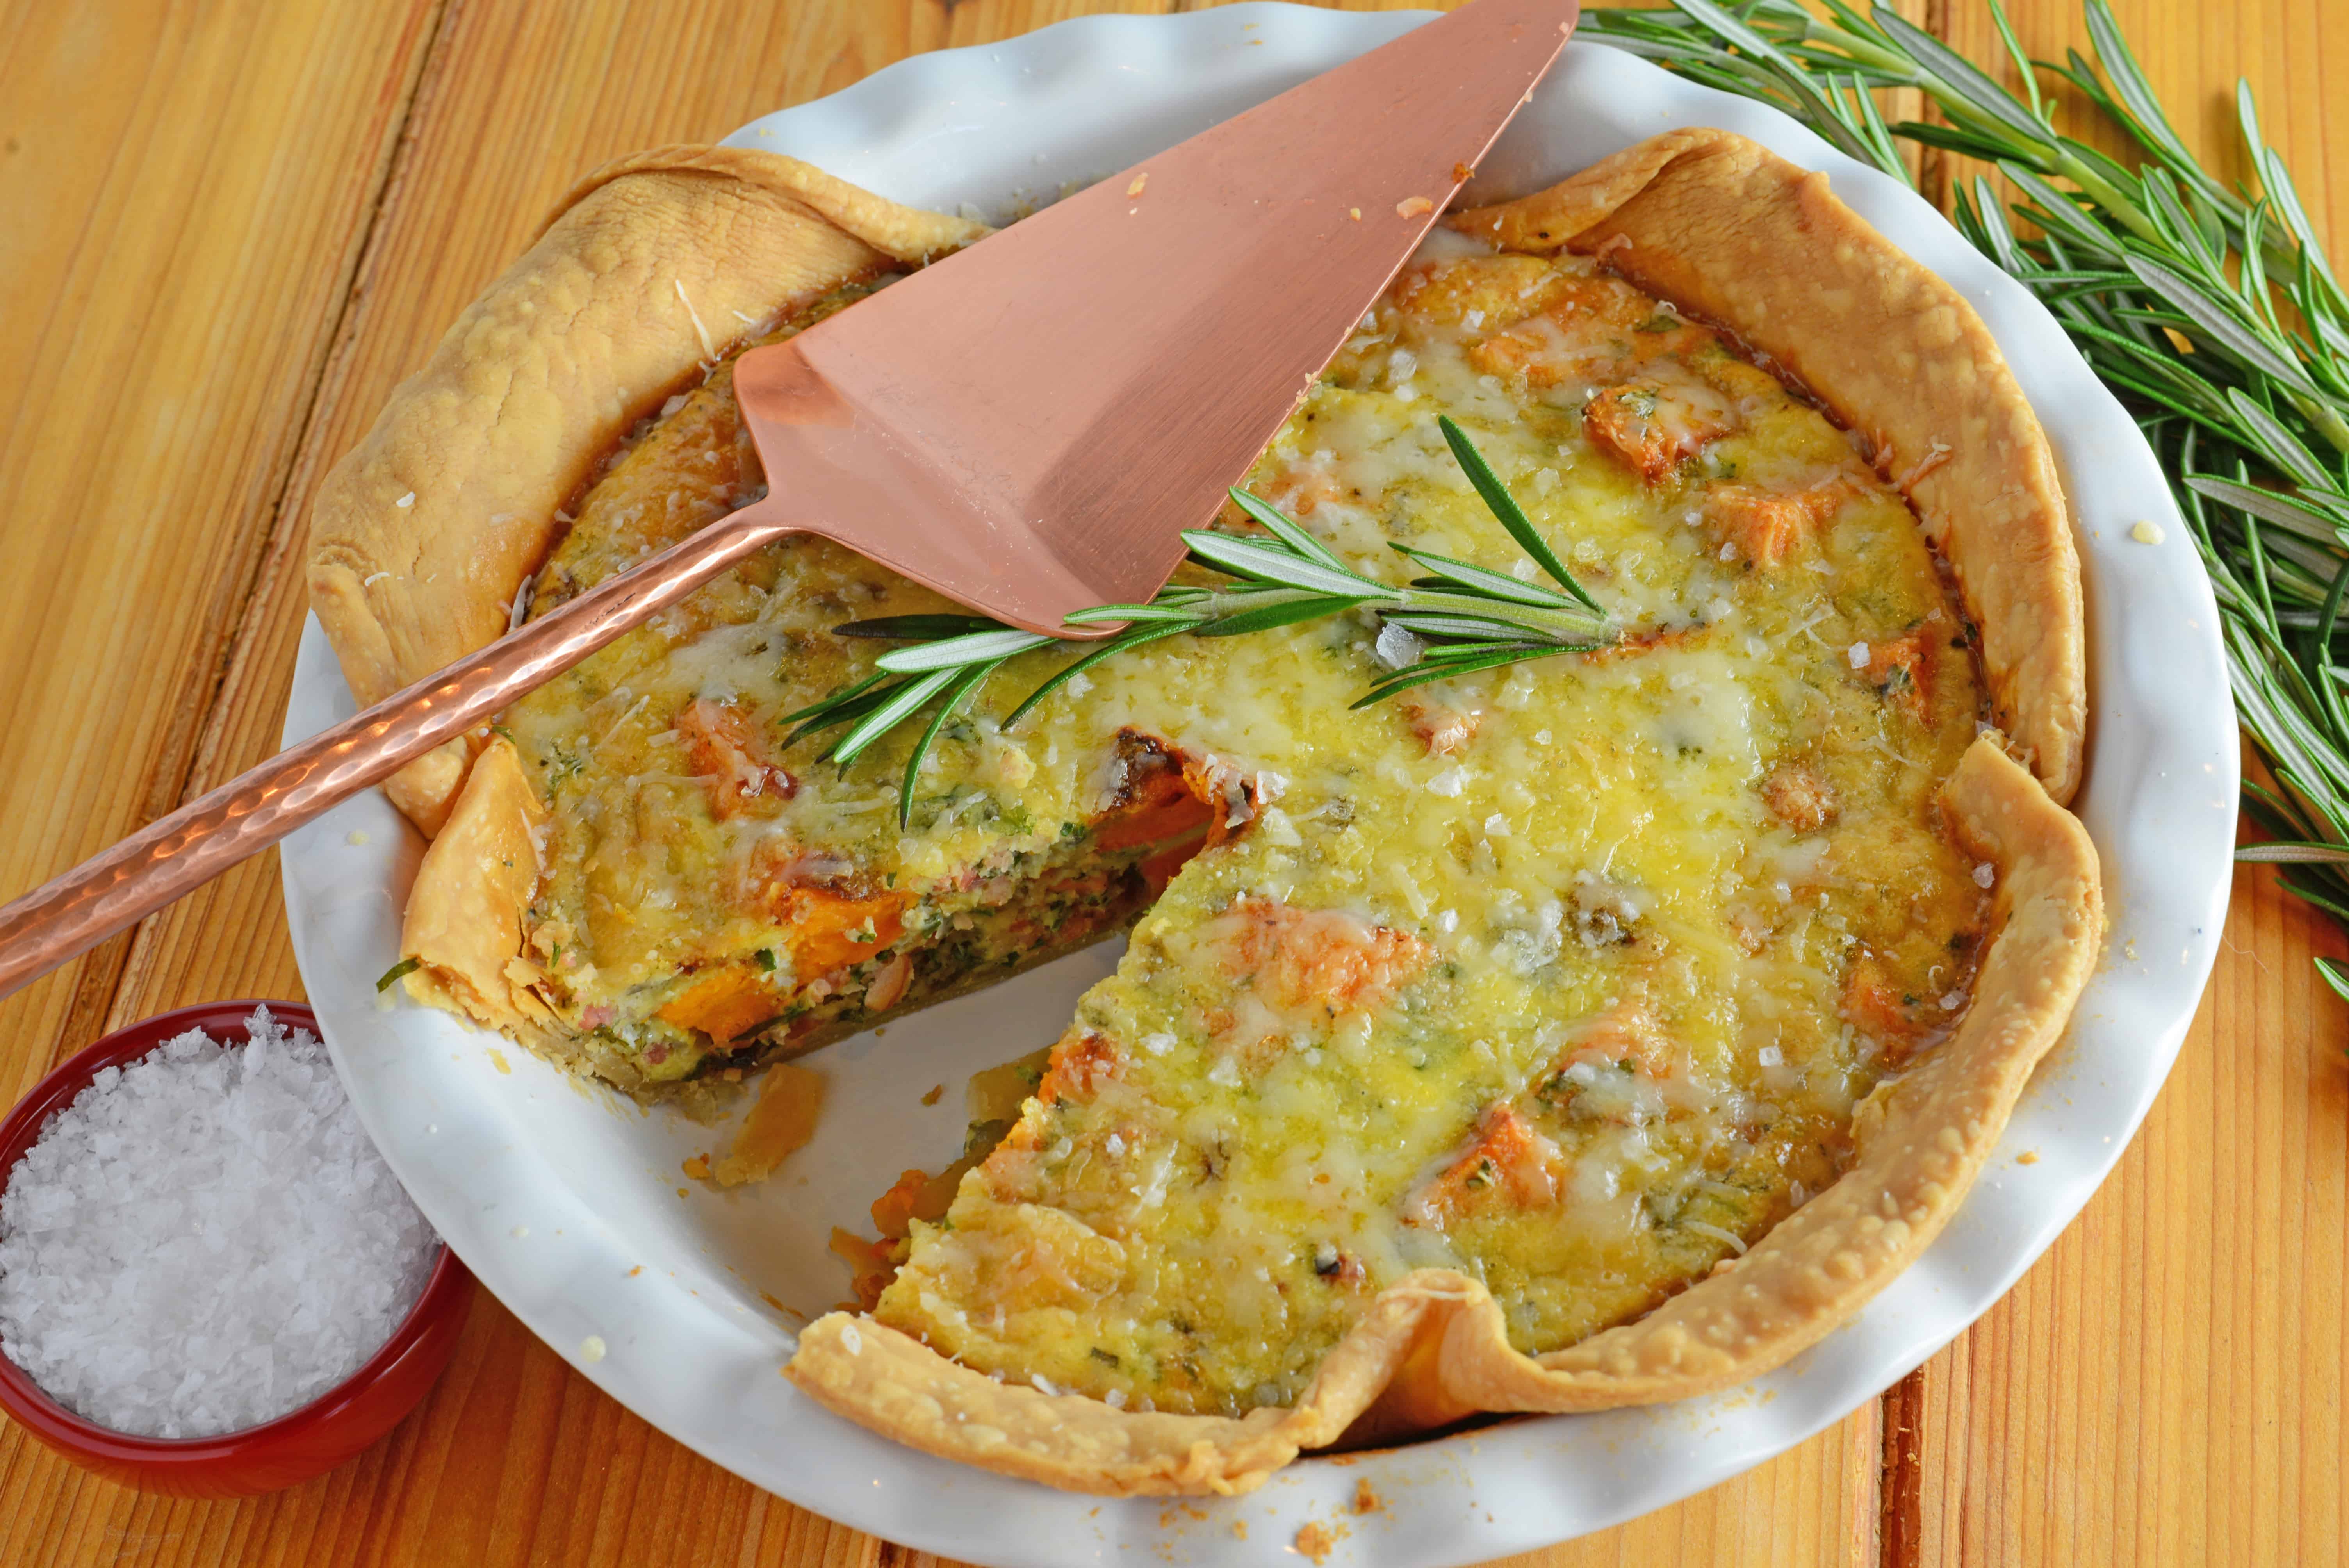 Sweet Potato Quiche can be made as a brunch, entree or side dish. Roasted sweet potatoes, red onion, bacon and rosemary make this a winning quiche recipe!